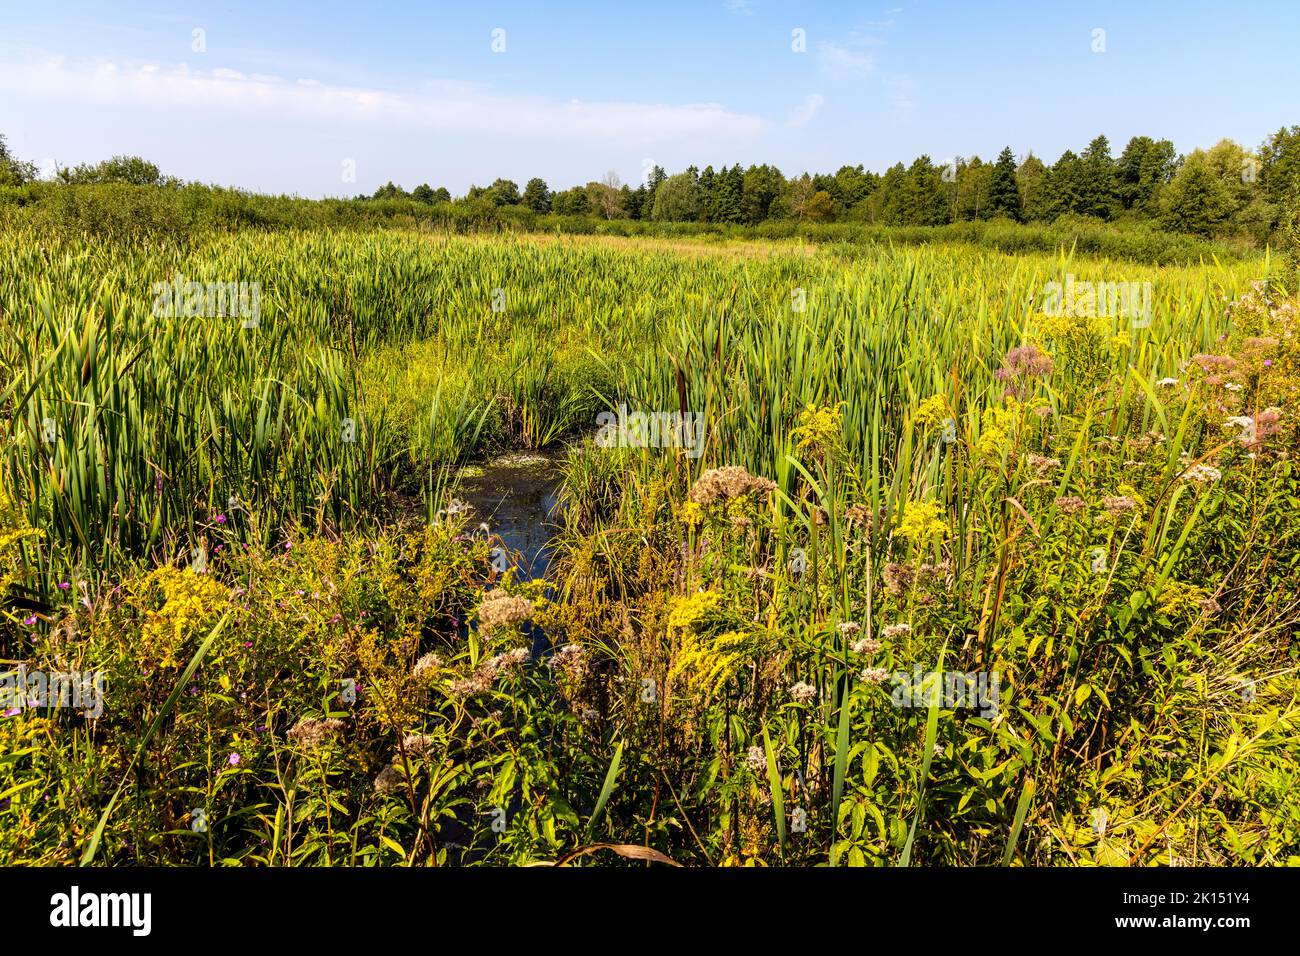 Panoramic view of dense wetland vegetation of Bagno Calowanie Swamp wildlife reserve in Podblel village south of Warsaw in Mazovia region of Poland Stock Photo